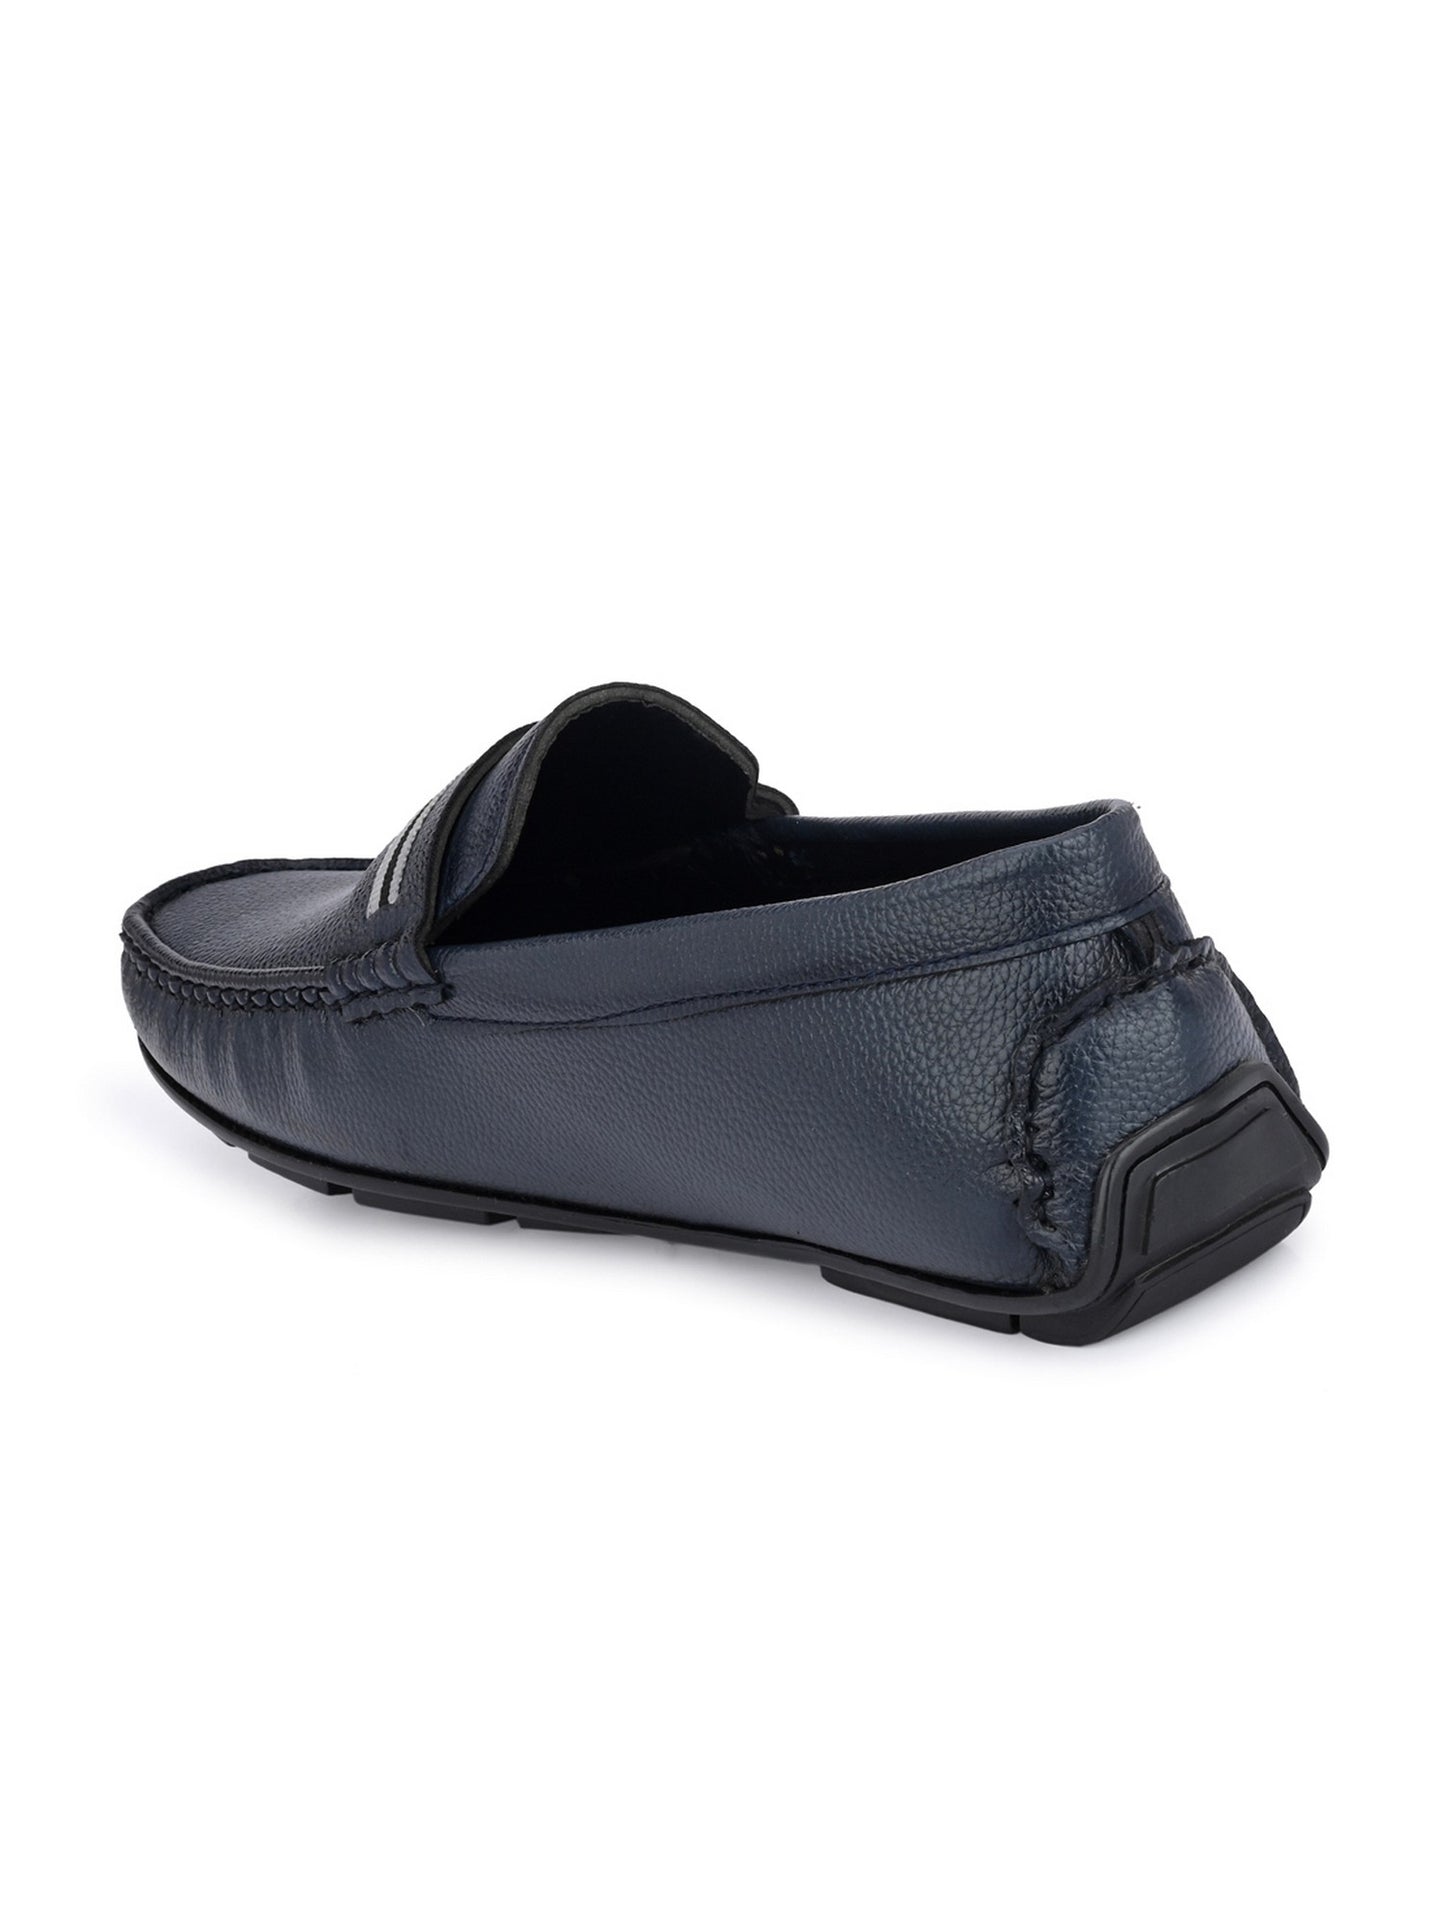 Guava Men's Blue Casual Slip On Driving Loafers (GV15JA785)